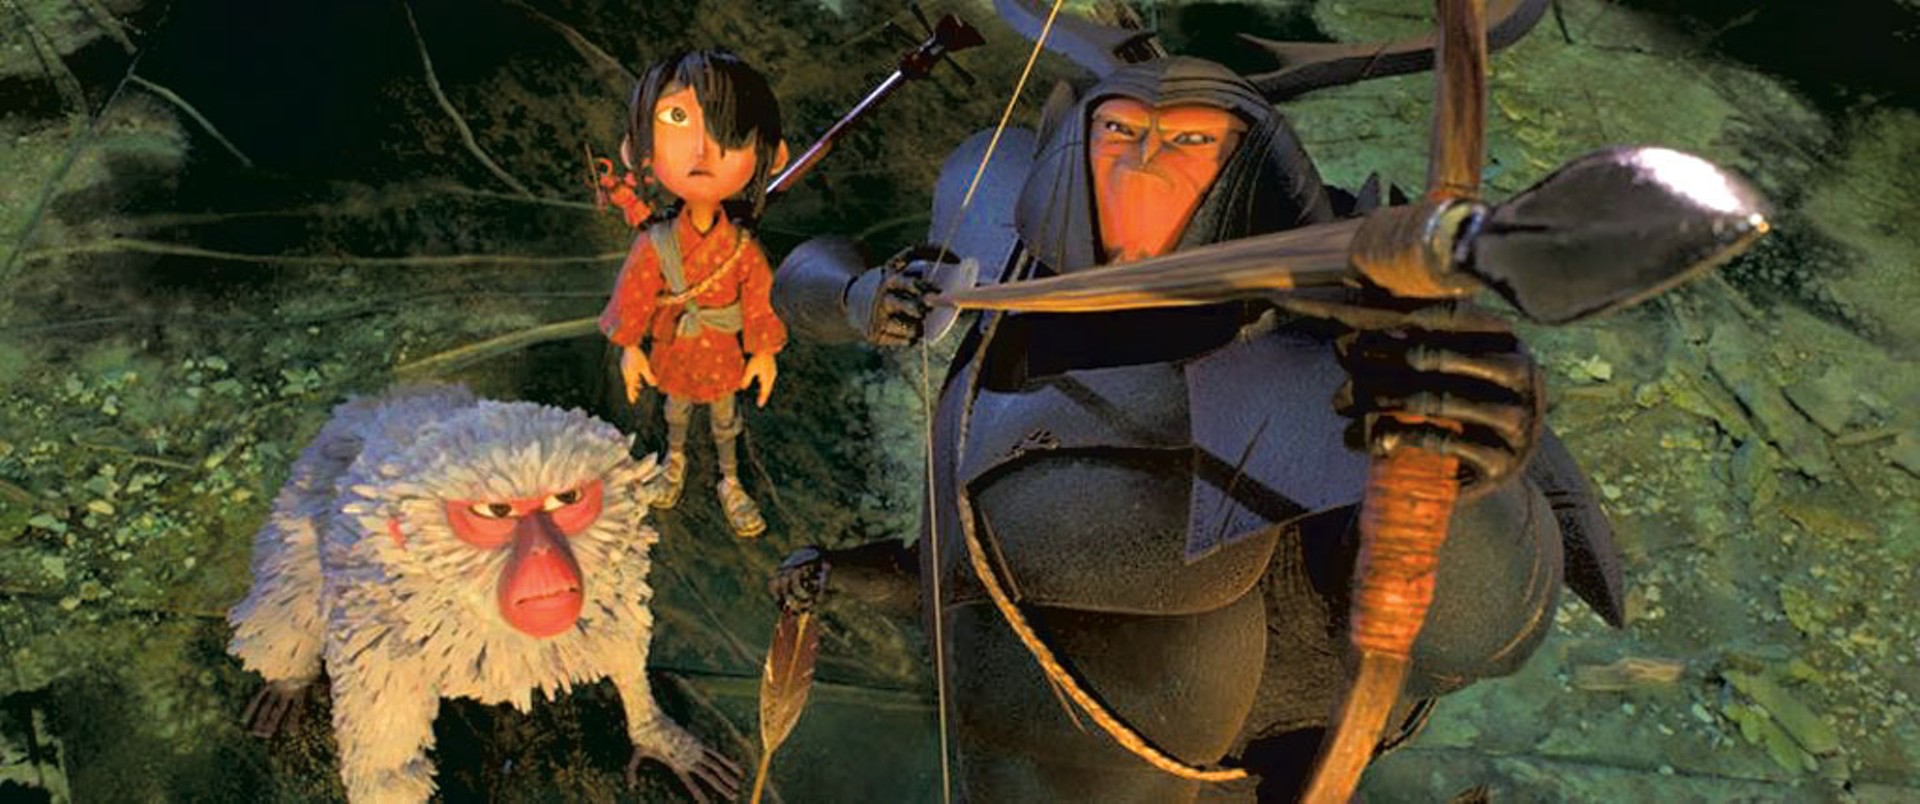 ON TARGET Laika’s latest may not be the most popular animated flick of the summer, but it is the most memorable.